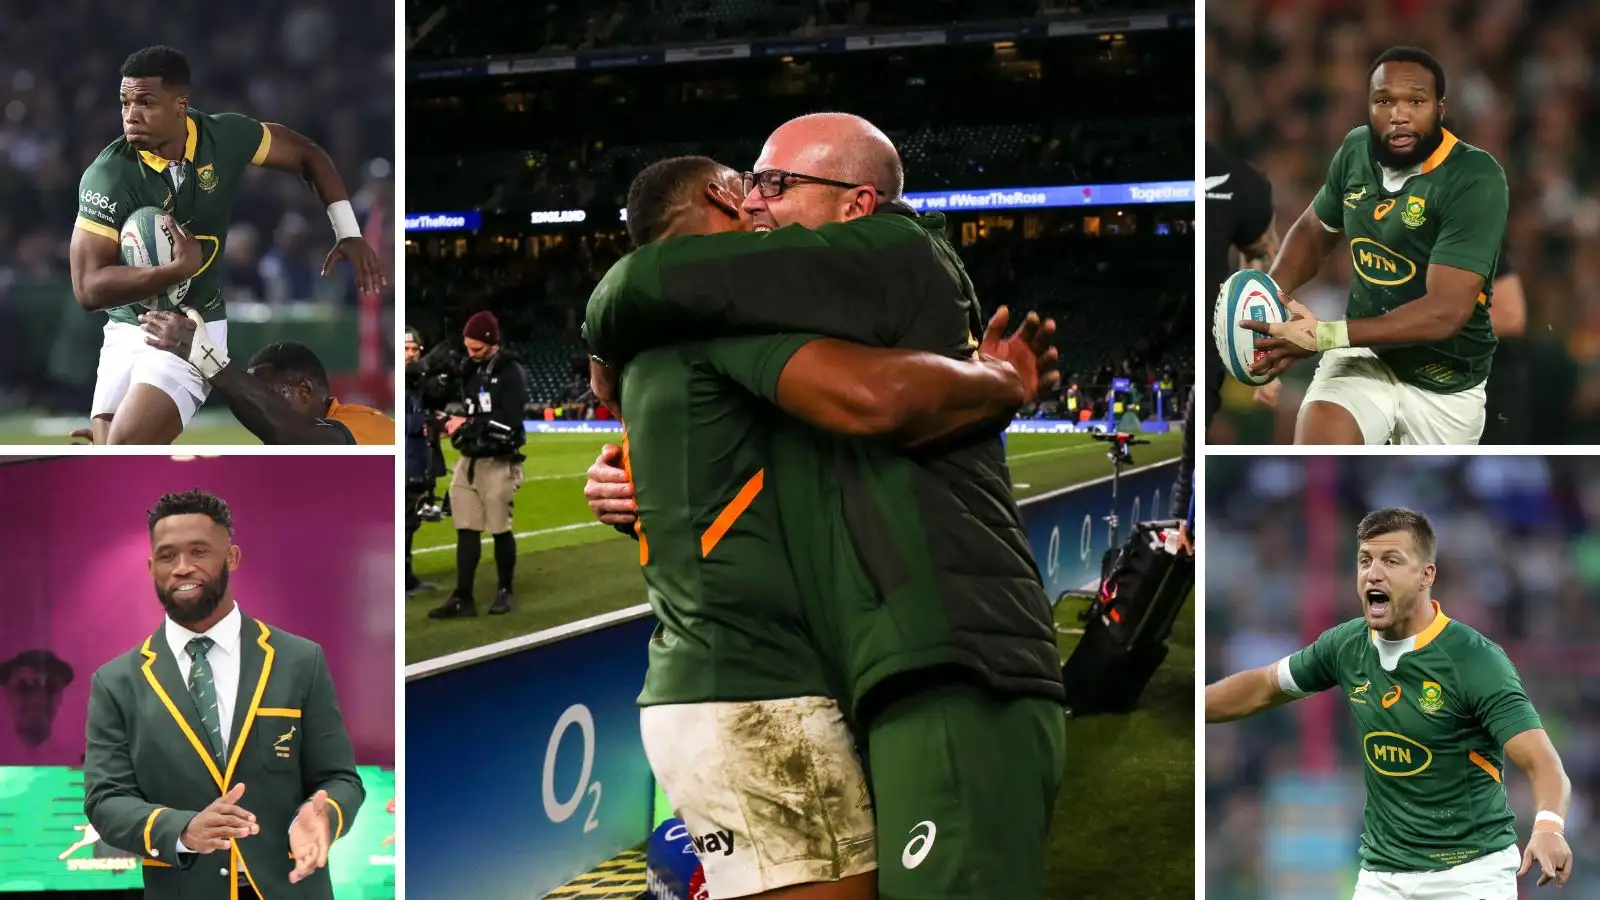 Winners and losers from the Springboks Rugby World Cup squad announcement including Grant Williams, Siya Kolisi, Jacques Nienaber, Handre Pollard and Lukhanyo Am.